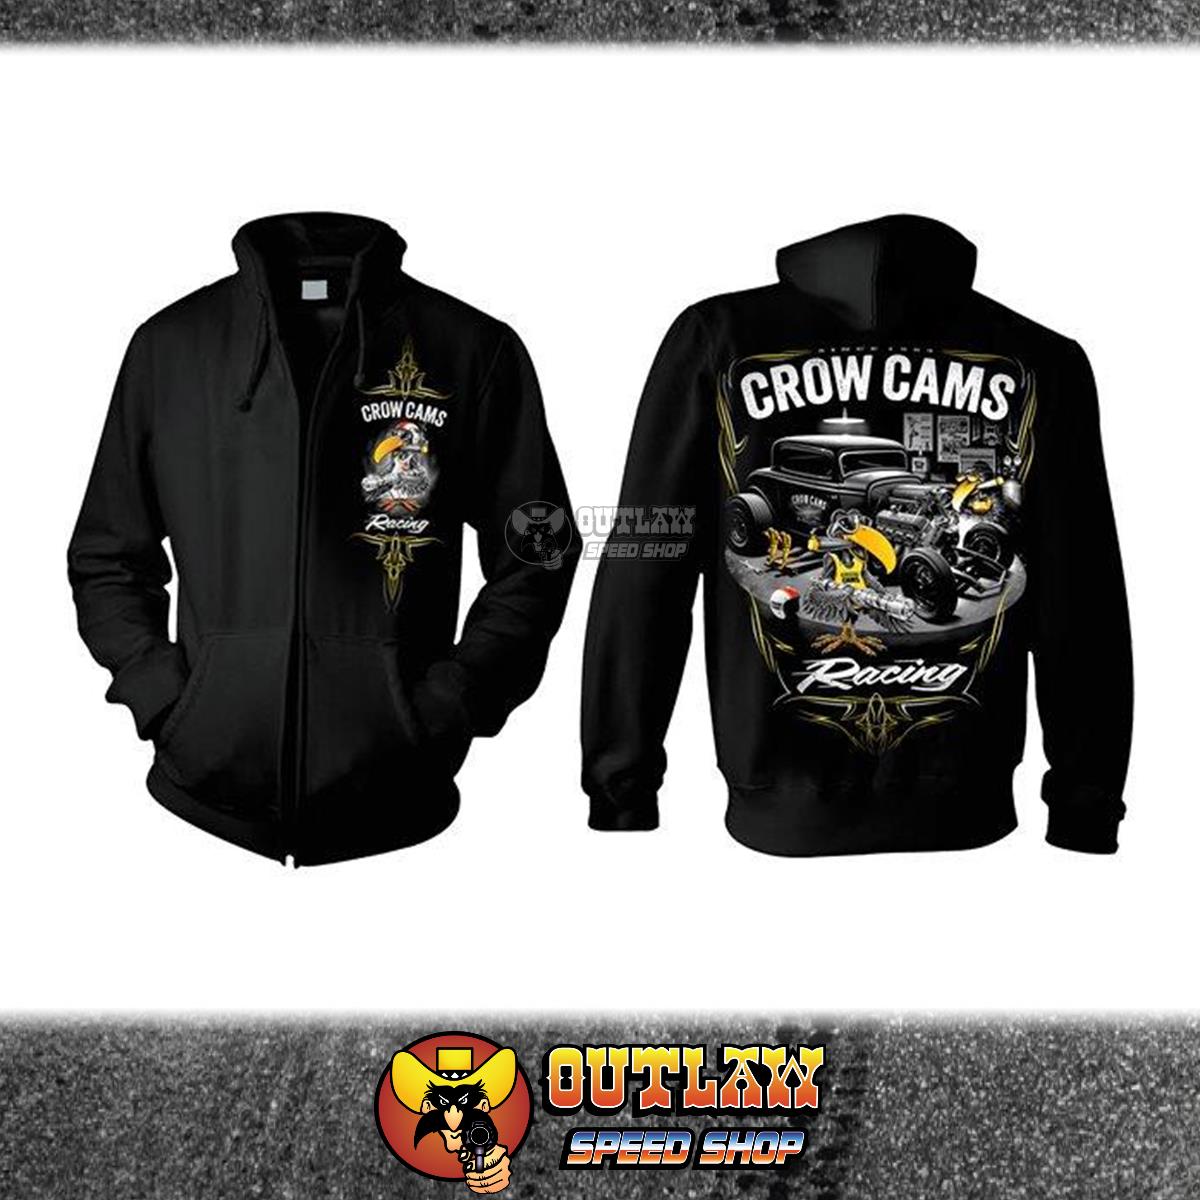 CROW CAMS HOODIE BLACK COTTON HOT ROD GARAGE THEME LARGE - CCHOODIES-L - Picture 1 of 1